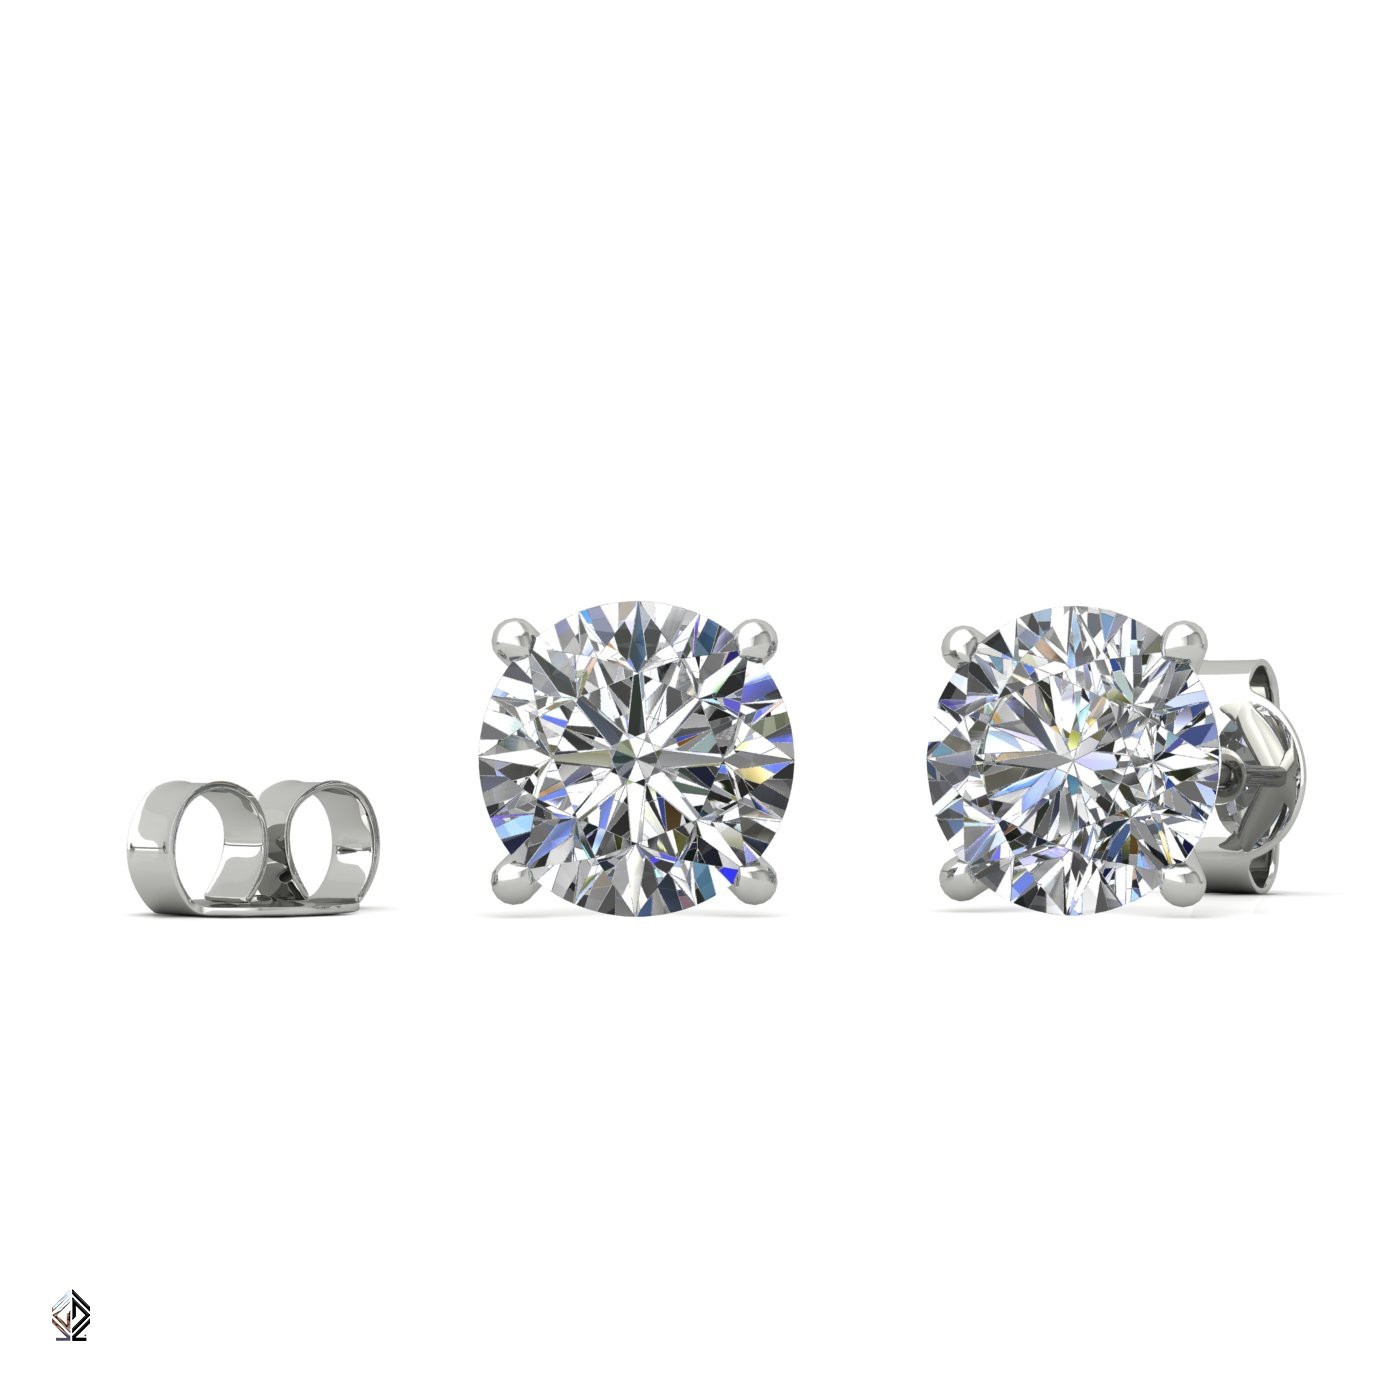 18k white gold 2.5 ct each (5,0 tcw) 4 prongs round cut classic diamond earring studs Photos & images